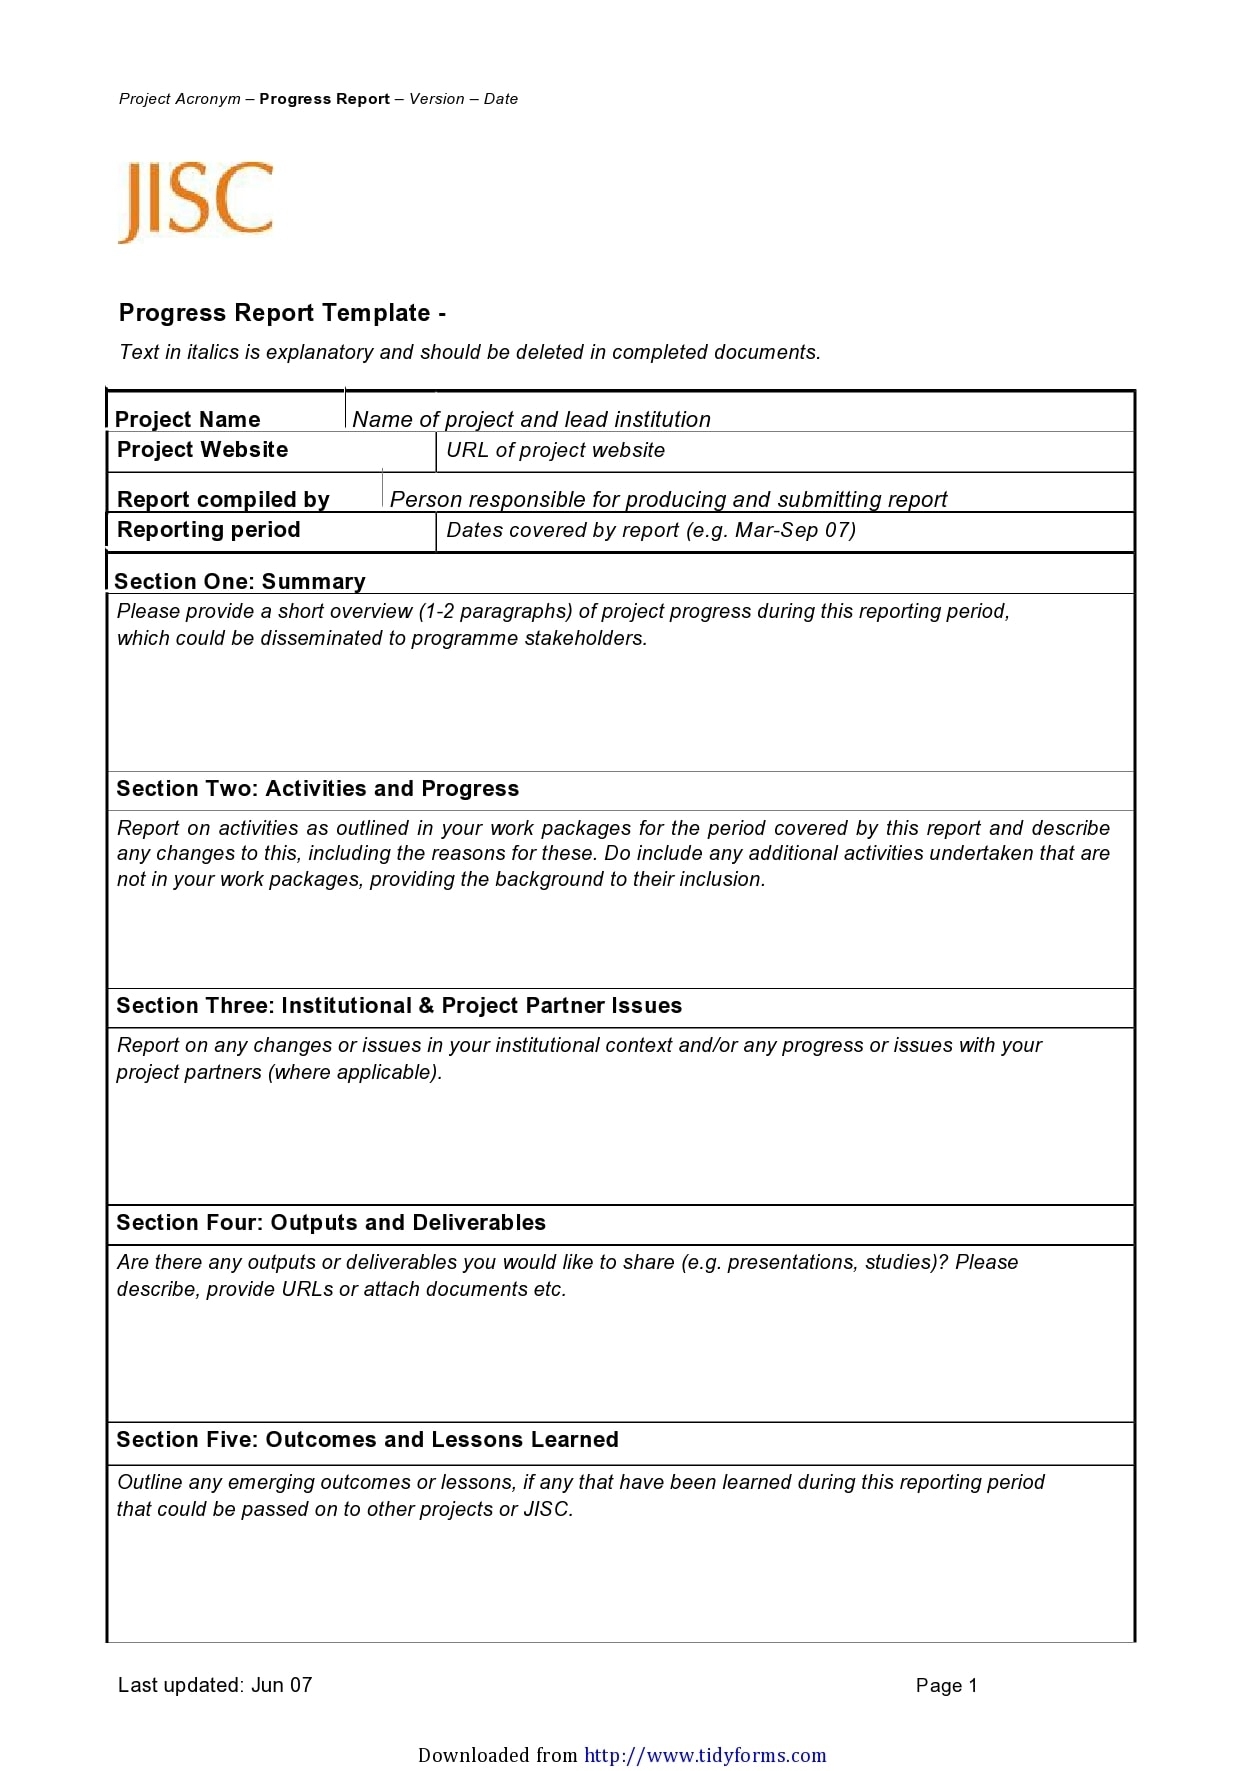 50 Professional Progress Report Templates (Free) - Templatearchive intended for Company Progress Report Template